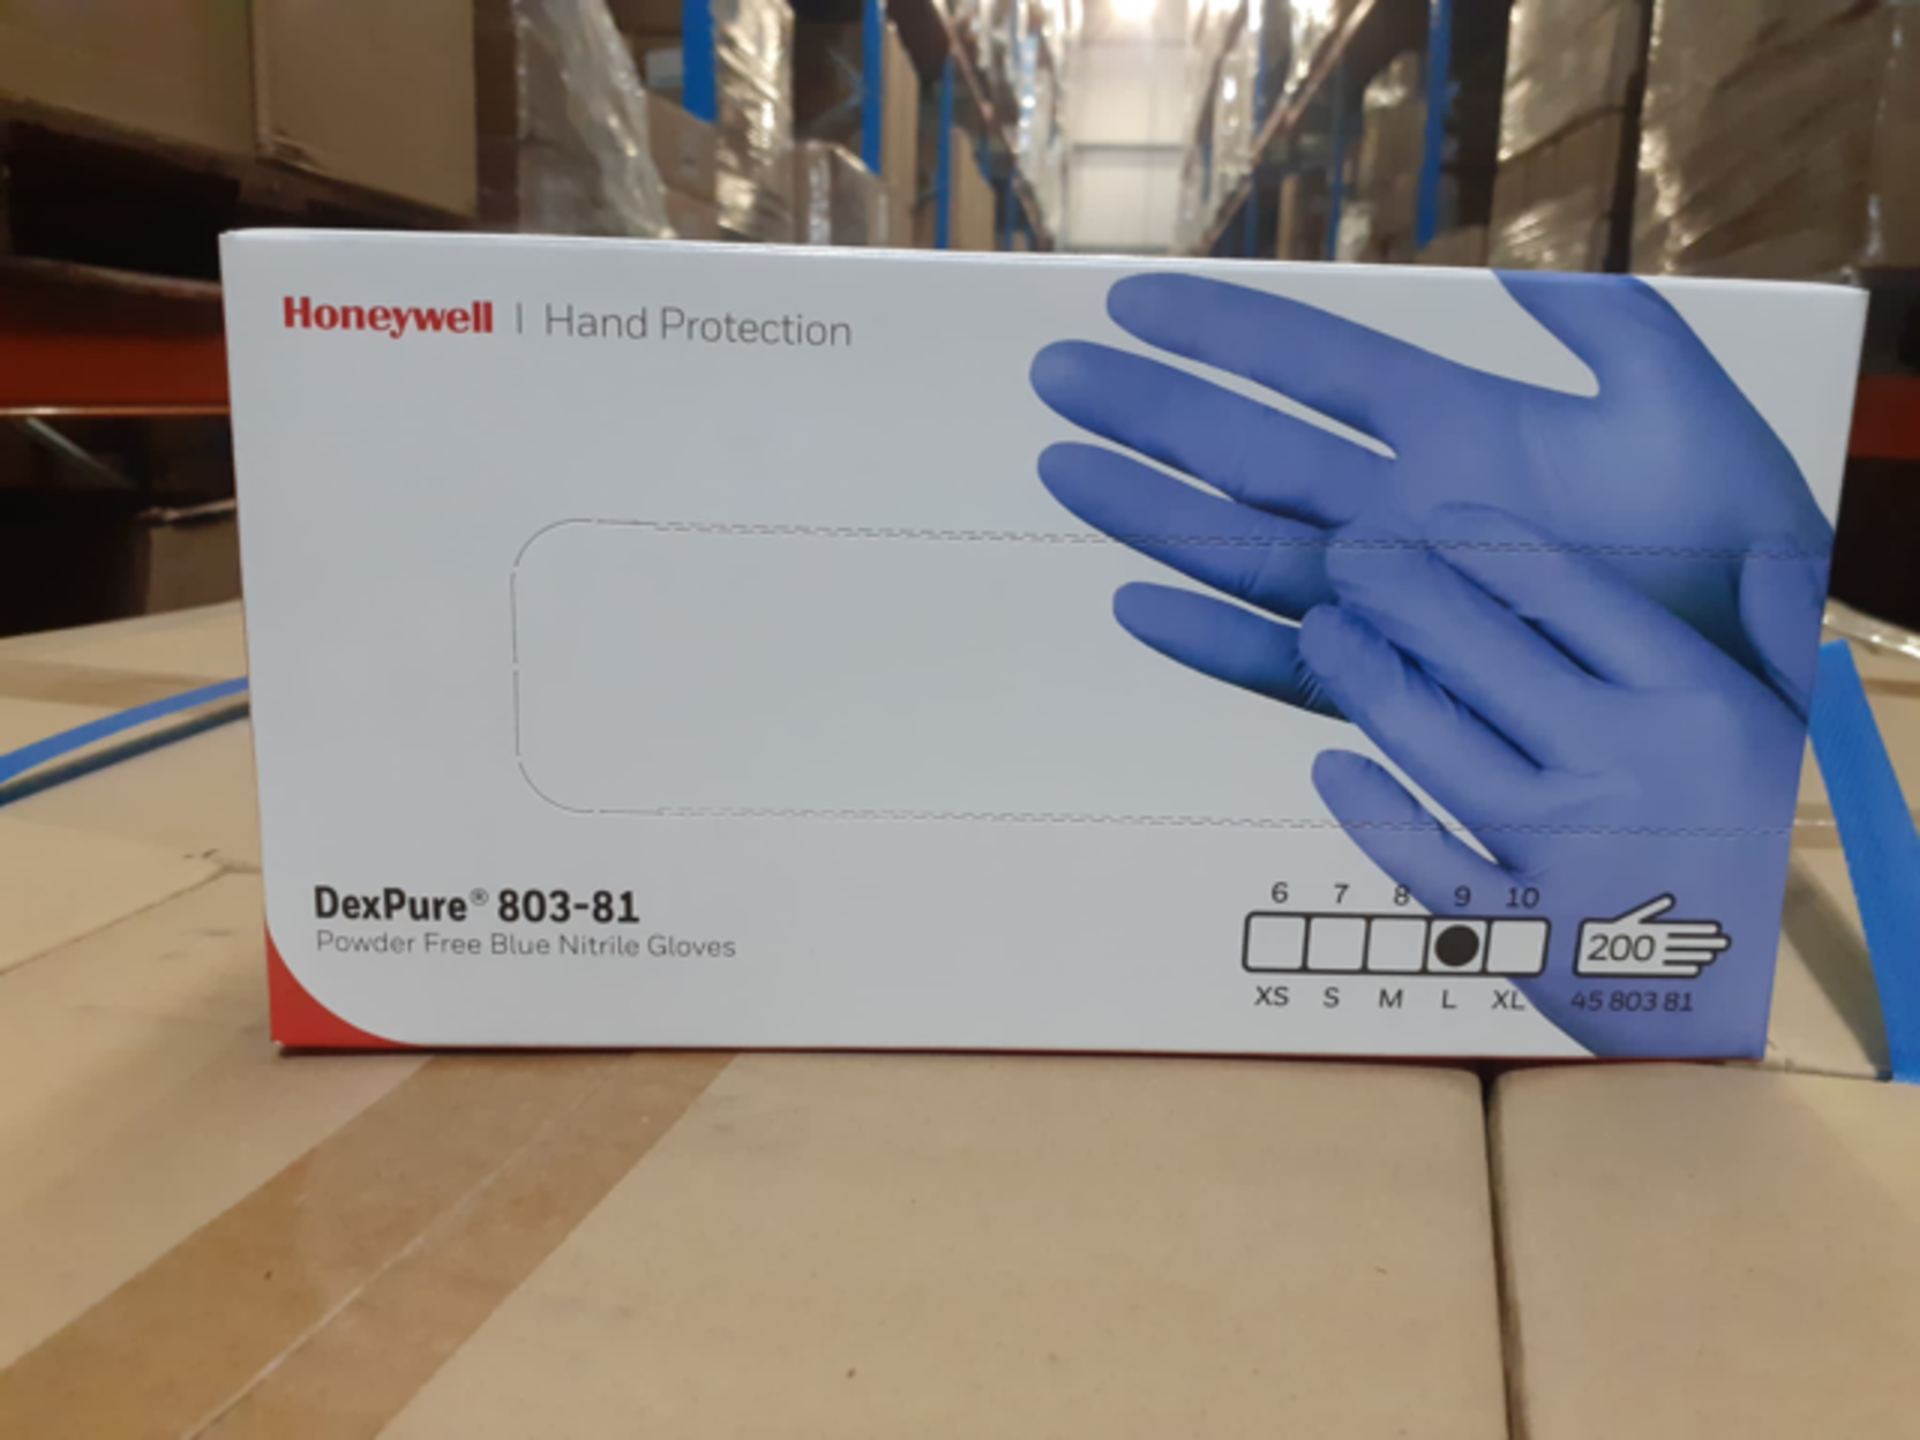 540 X BRAND NEW PACKS OF 200 HONEYWELL DEXPURE POWDER FREE BLUE NITRILE GLOVES SIZE LARGE EXP JUNE - Image 6 of 7